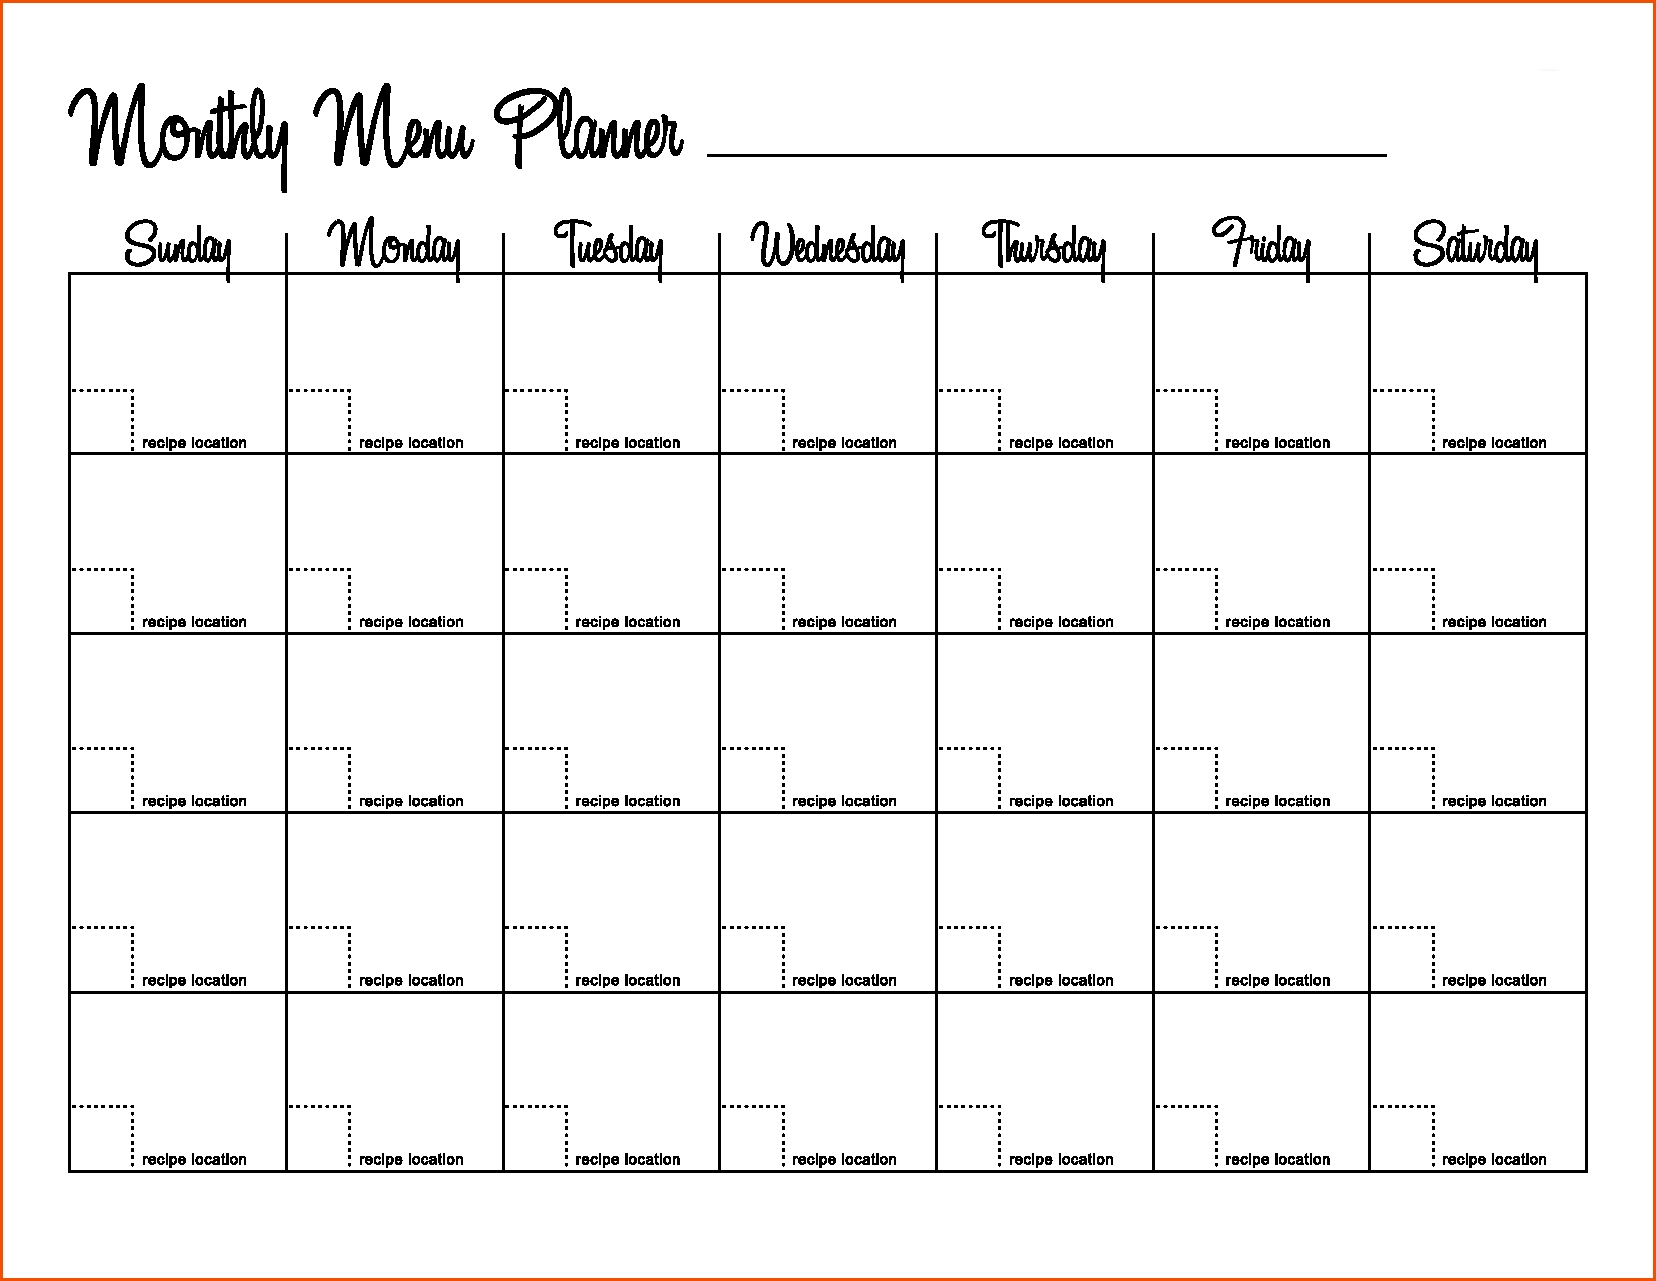 Monthly Planner Template | Monthly Planner Template | Monthly with regard to Free Blank Monthly Planner Templates